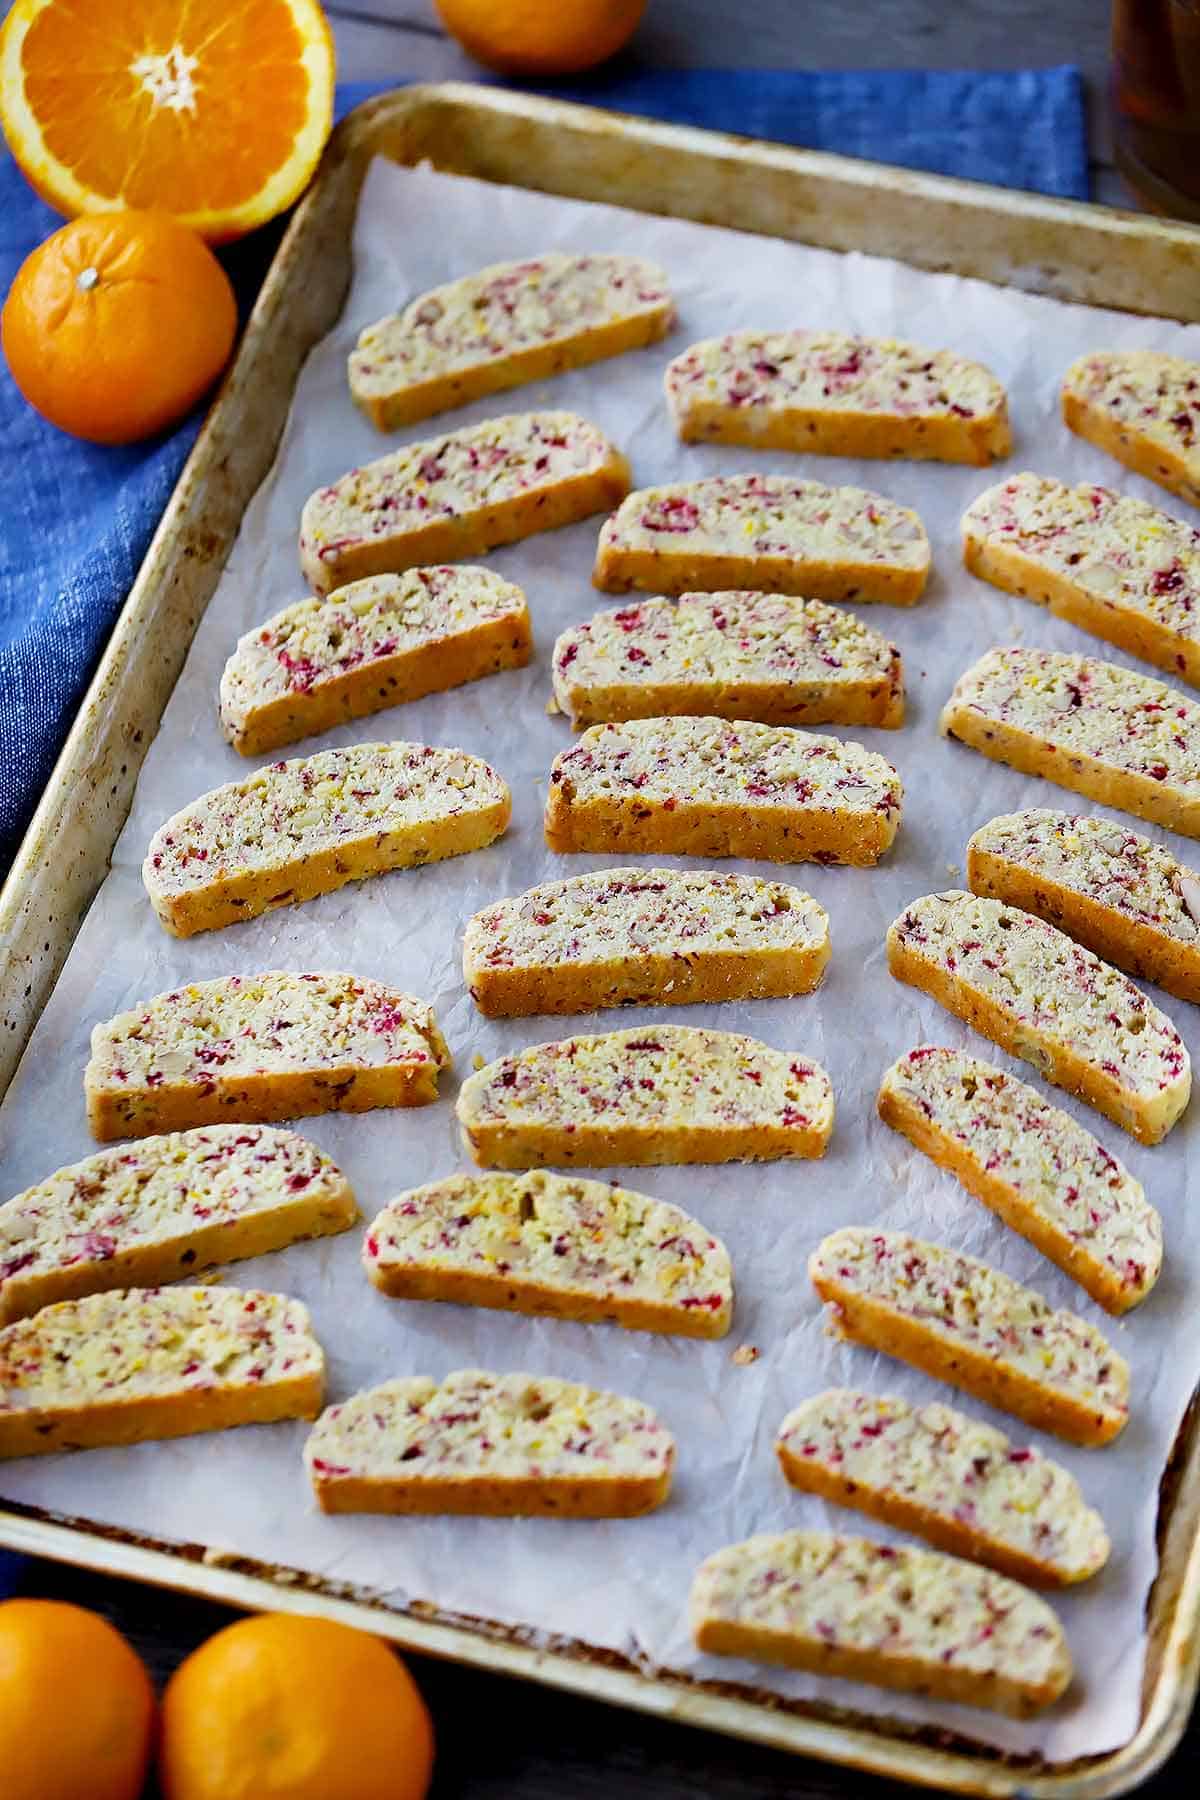 A baking sheet with biscotti on parchment paper with oranges in the background and a blue towel.